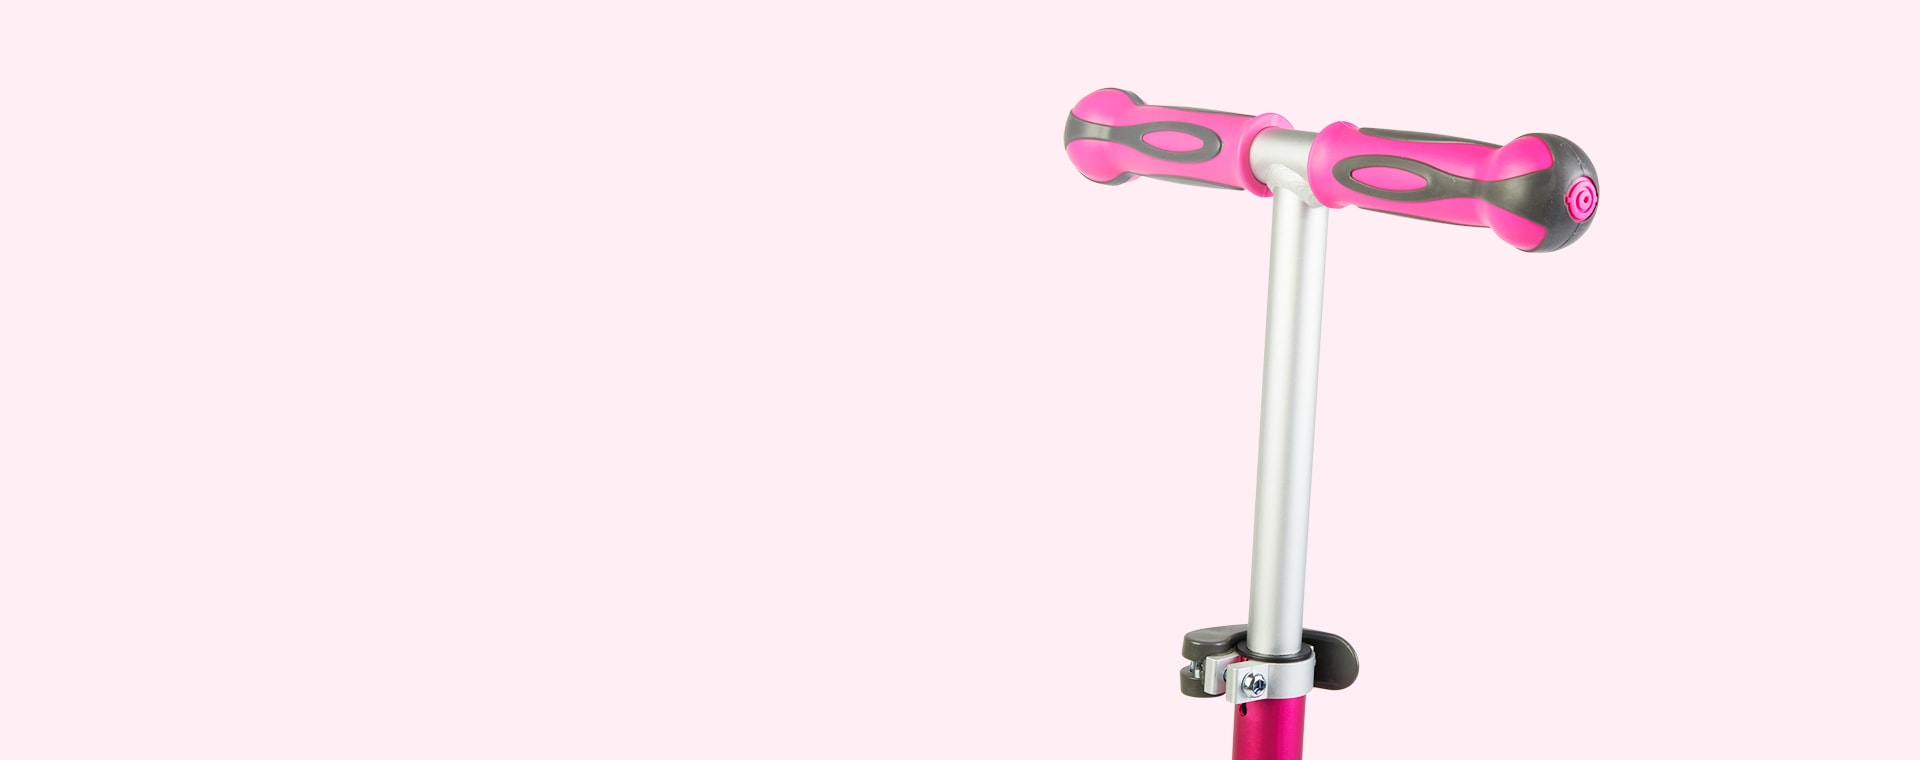 Deep Pink Globber Primo Foldable Wood Scooter